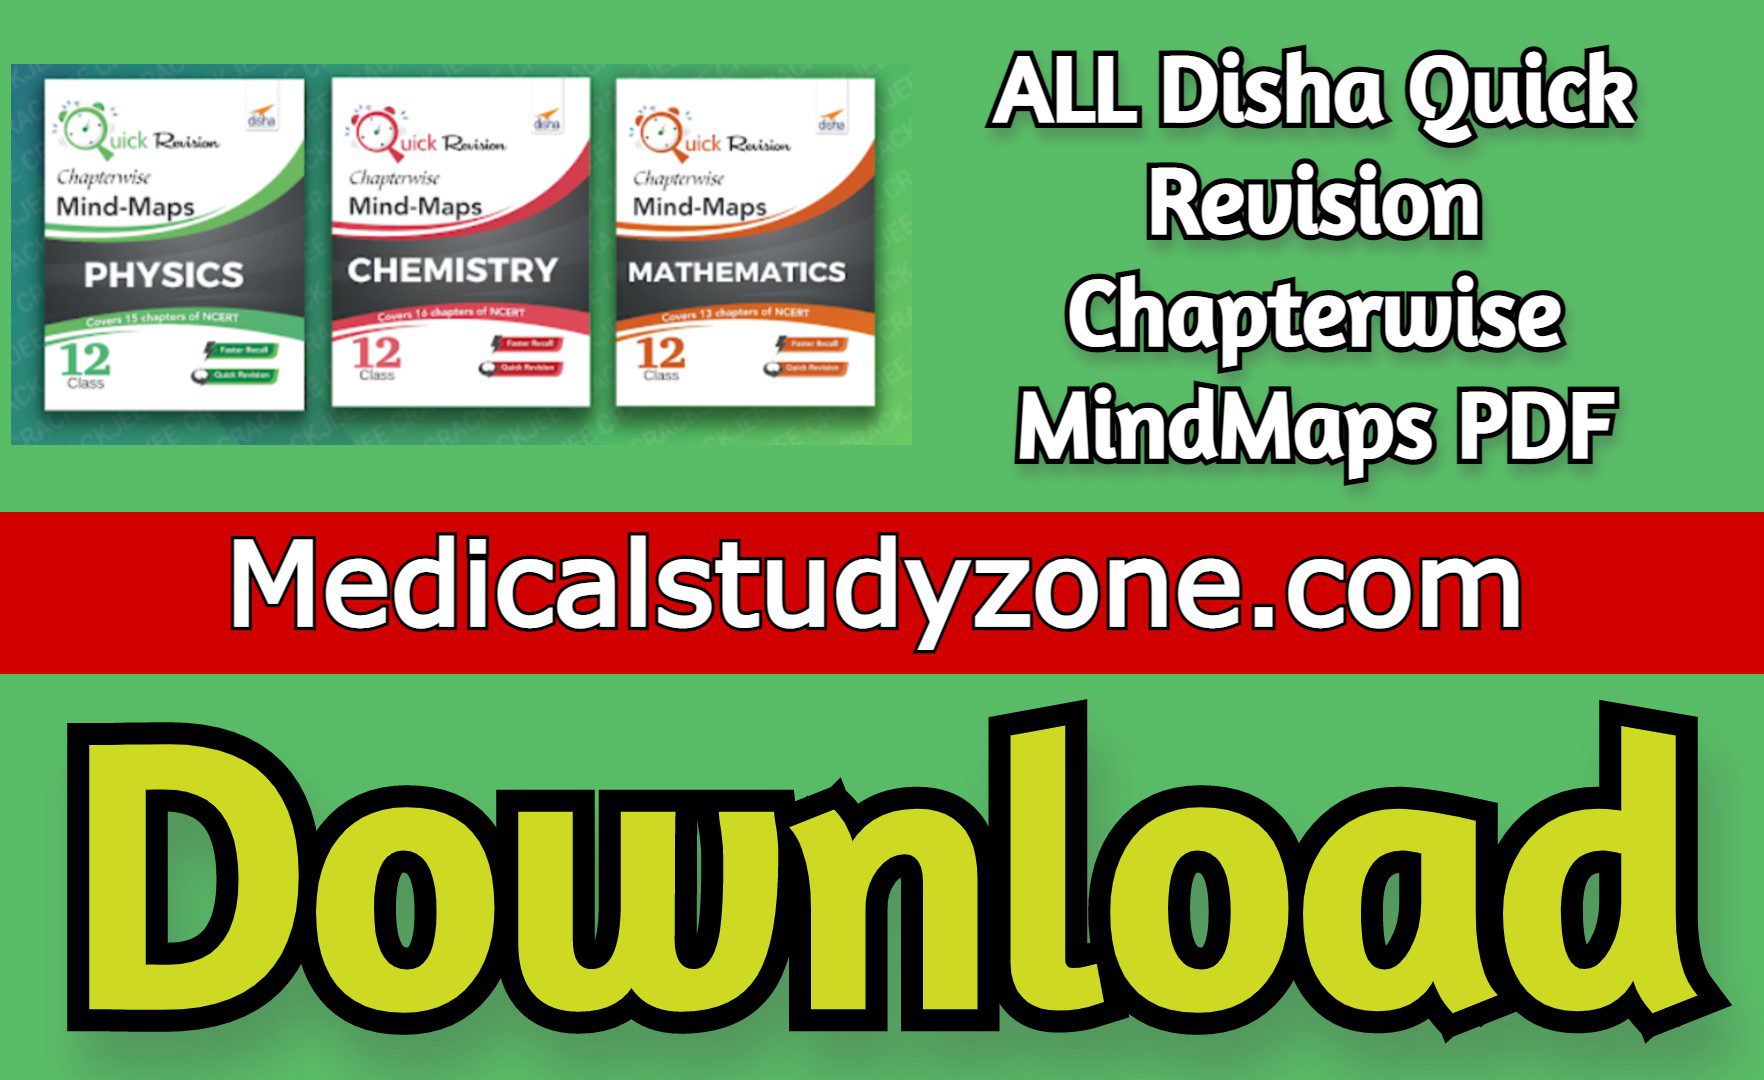 Download ALL Disha Quick Revision Chapterwise MindMaps PDF Free